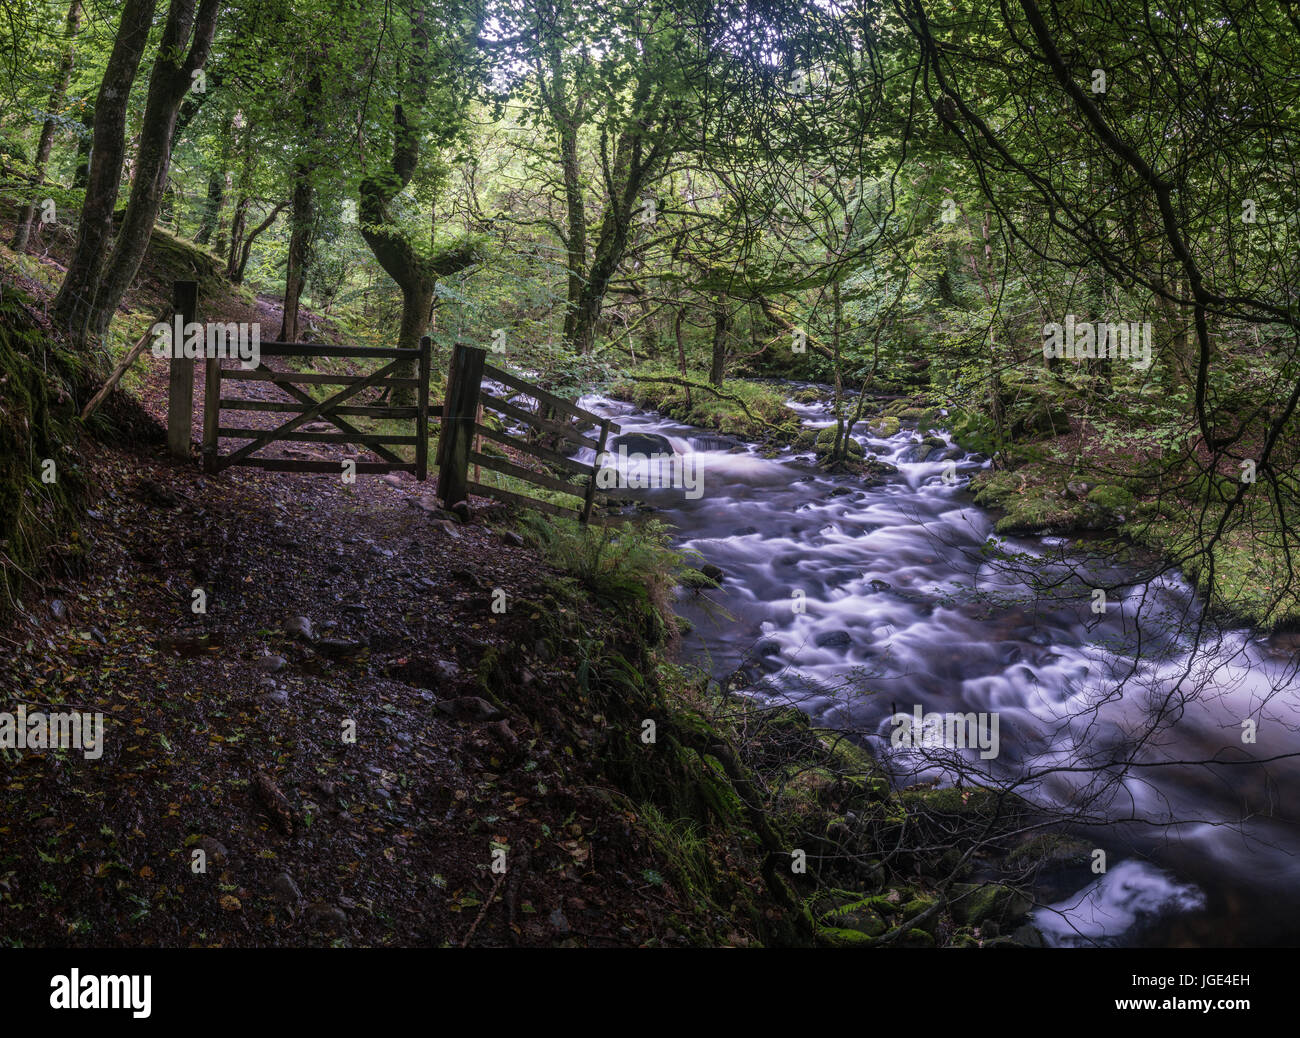 Fast flowing stream in an ancient wood with mossy trees Stock Photo